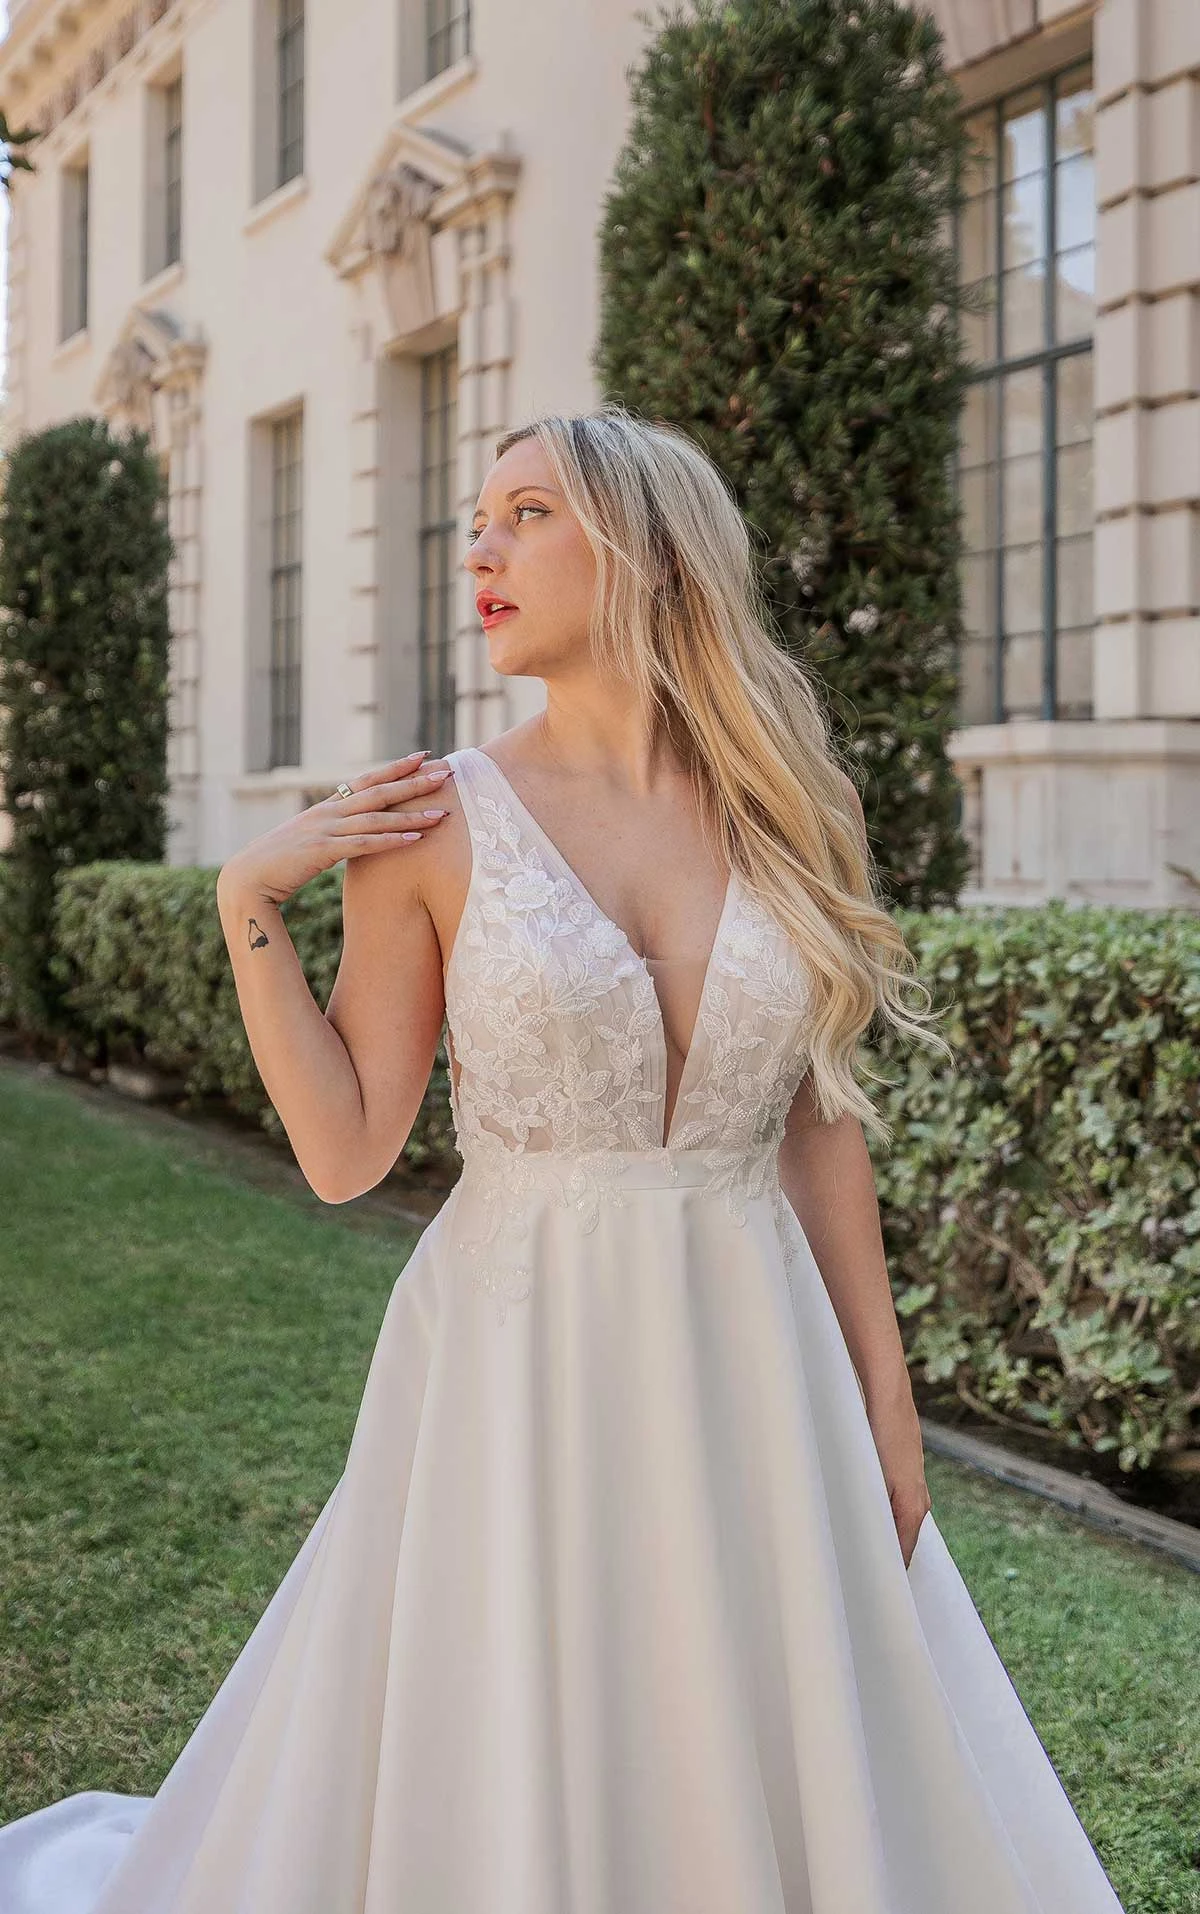 simple a-line wedding dress with lace bodice and simple skirt - D3640 by Essense of Australia